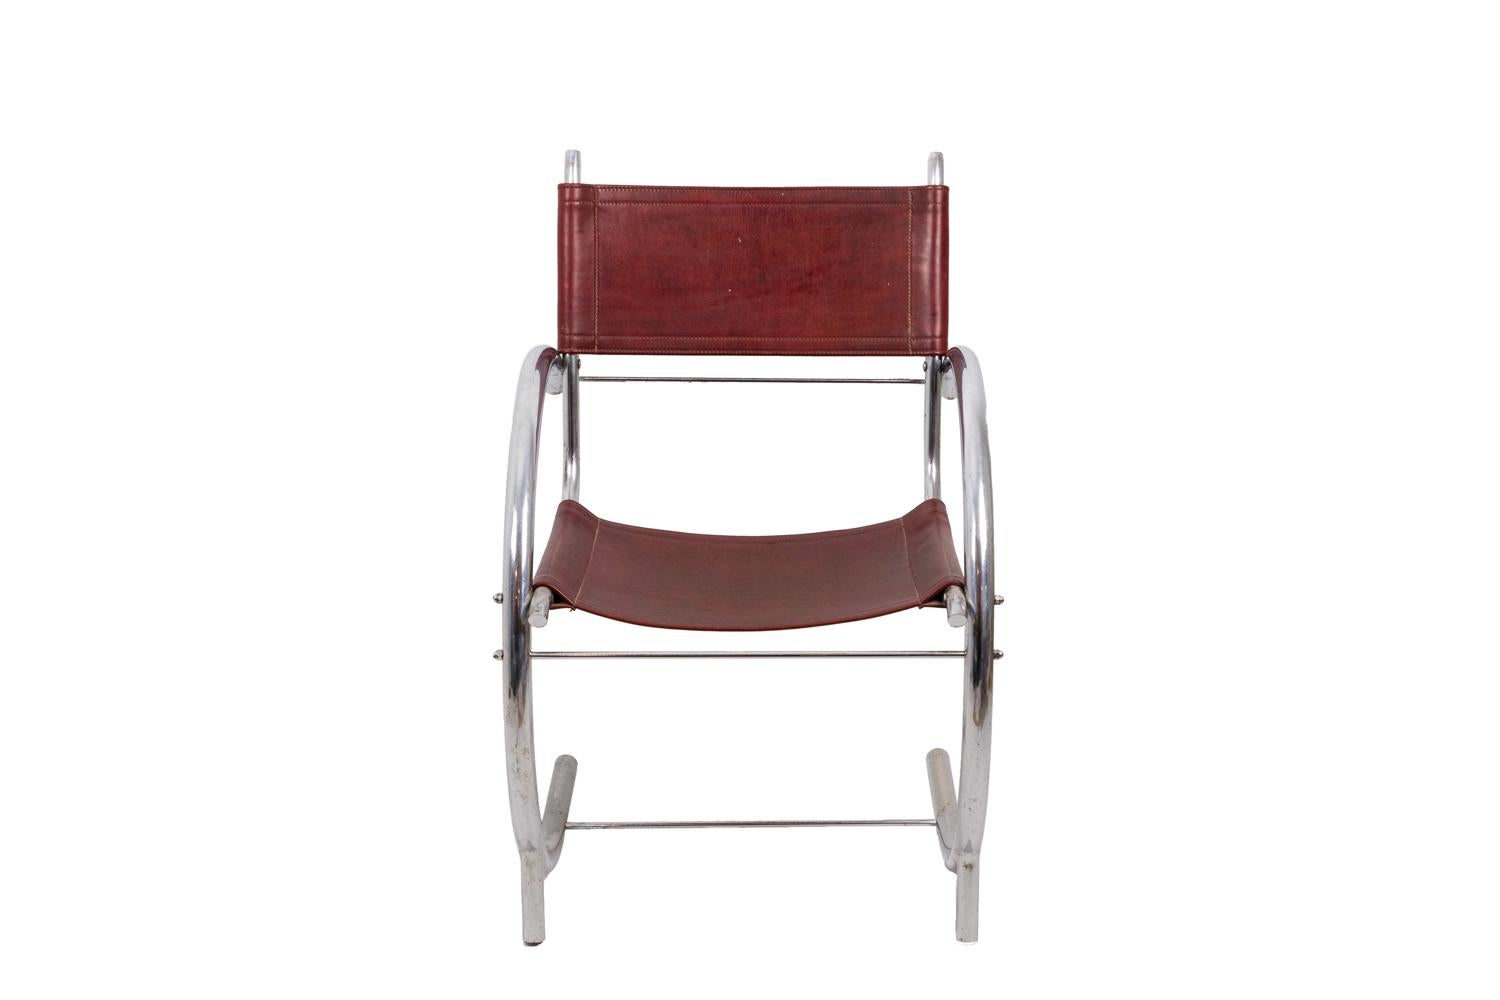 Armchair in chromed metal with legs and arms forming a half-circle. Legs linked with each other by a stick stretcher. Rectangular shape red leather seat and back.

Work realized in the 1930s.